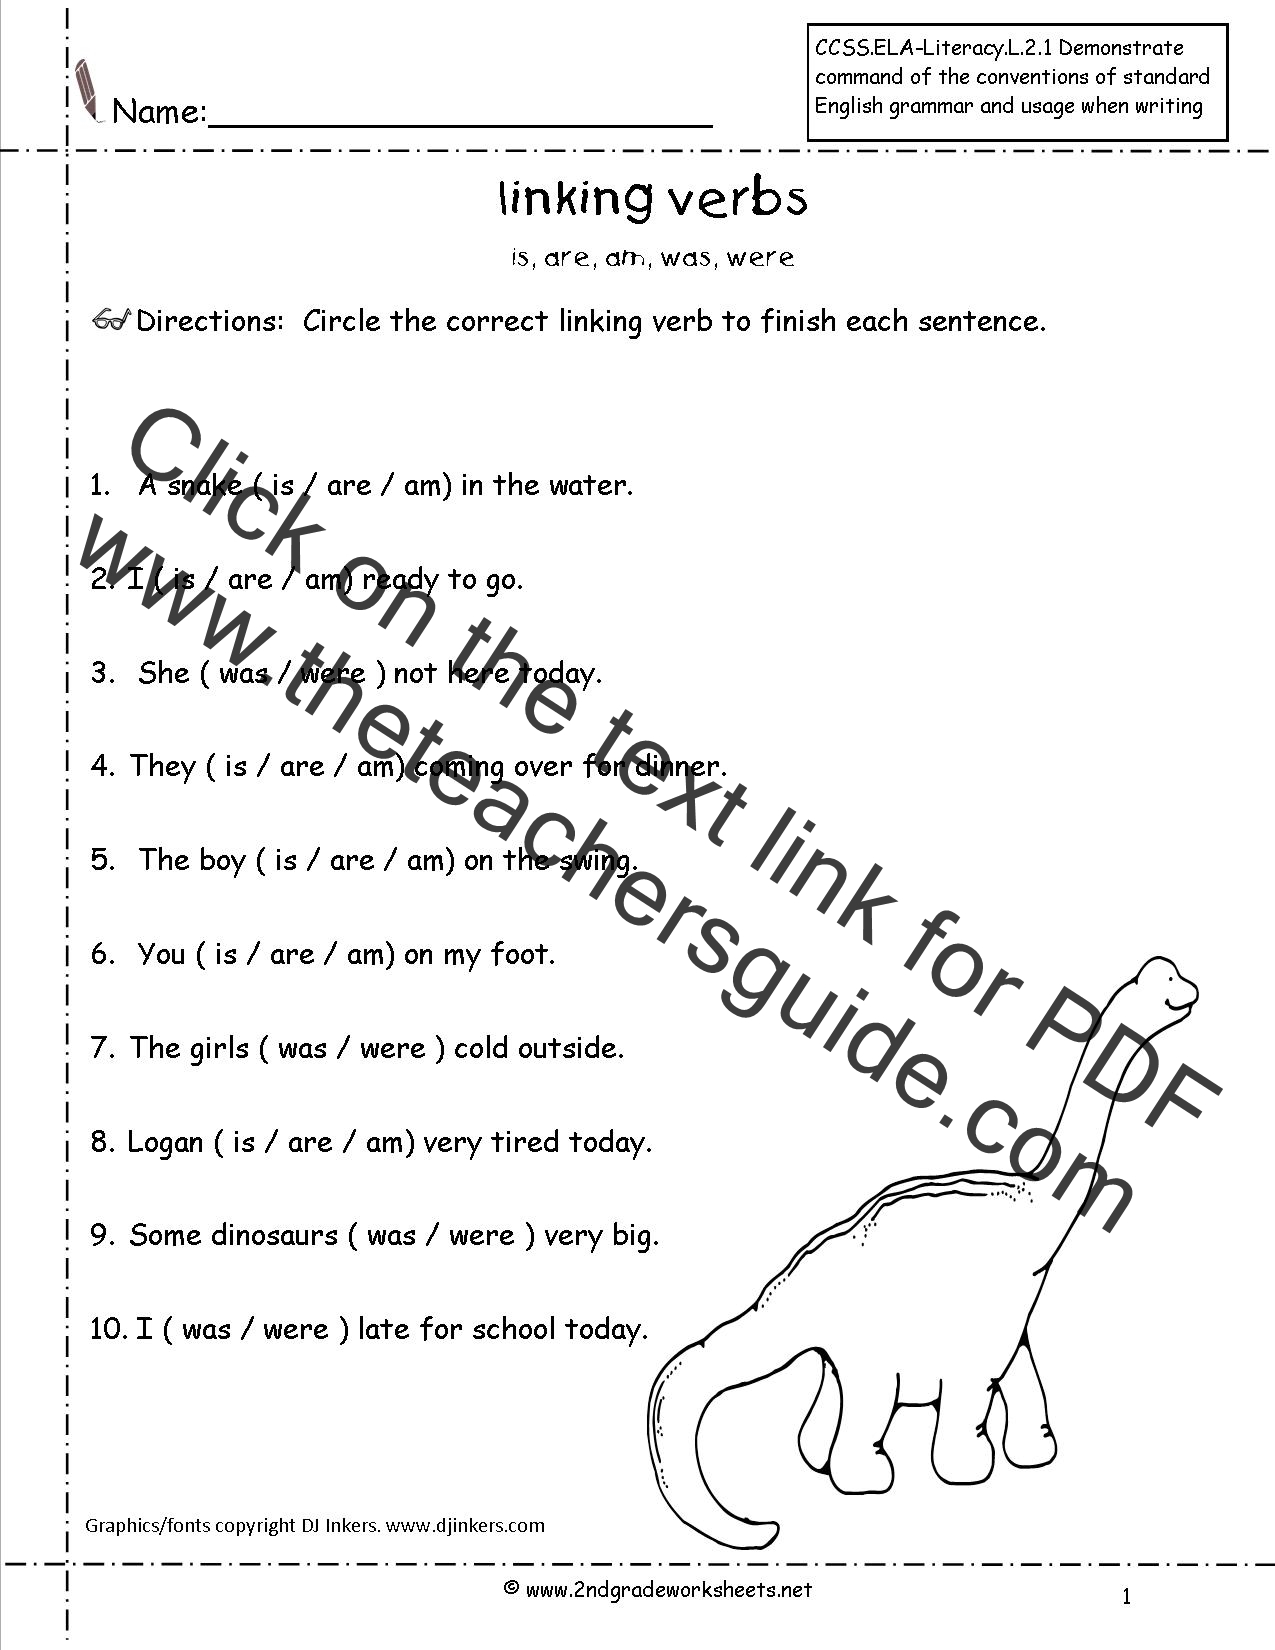 helping-vs-linking-verbs-worksheets-99worksheets-action-helping-linking-verbs-posters-and